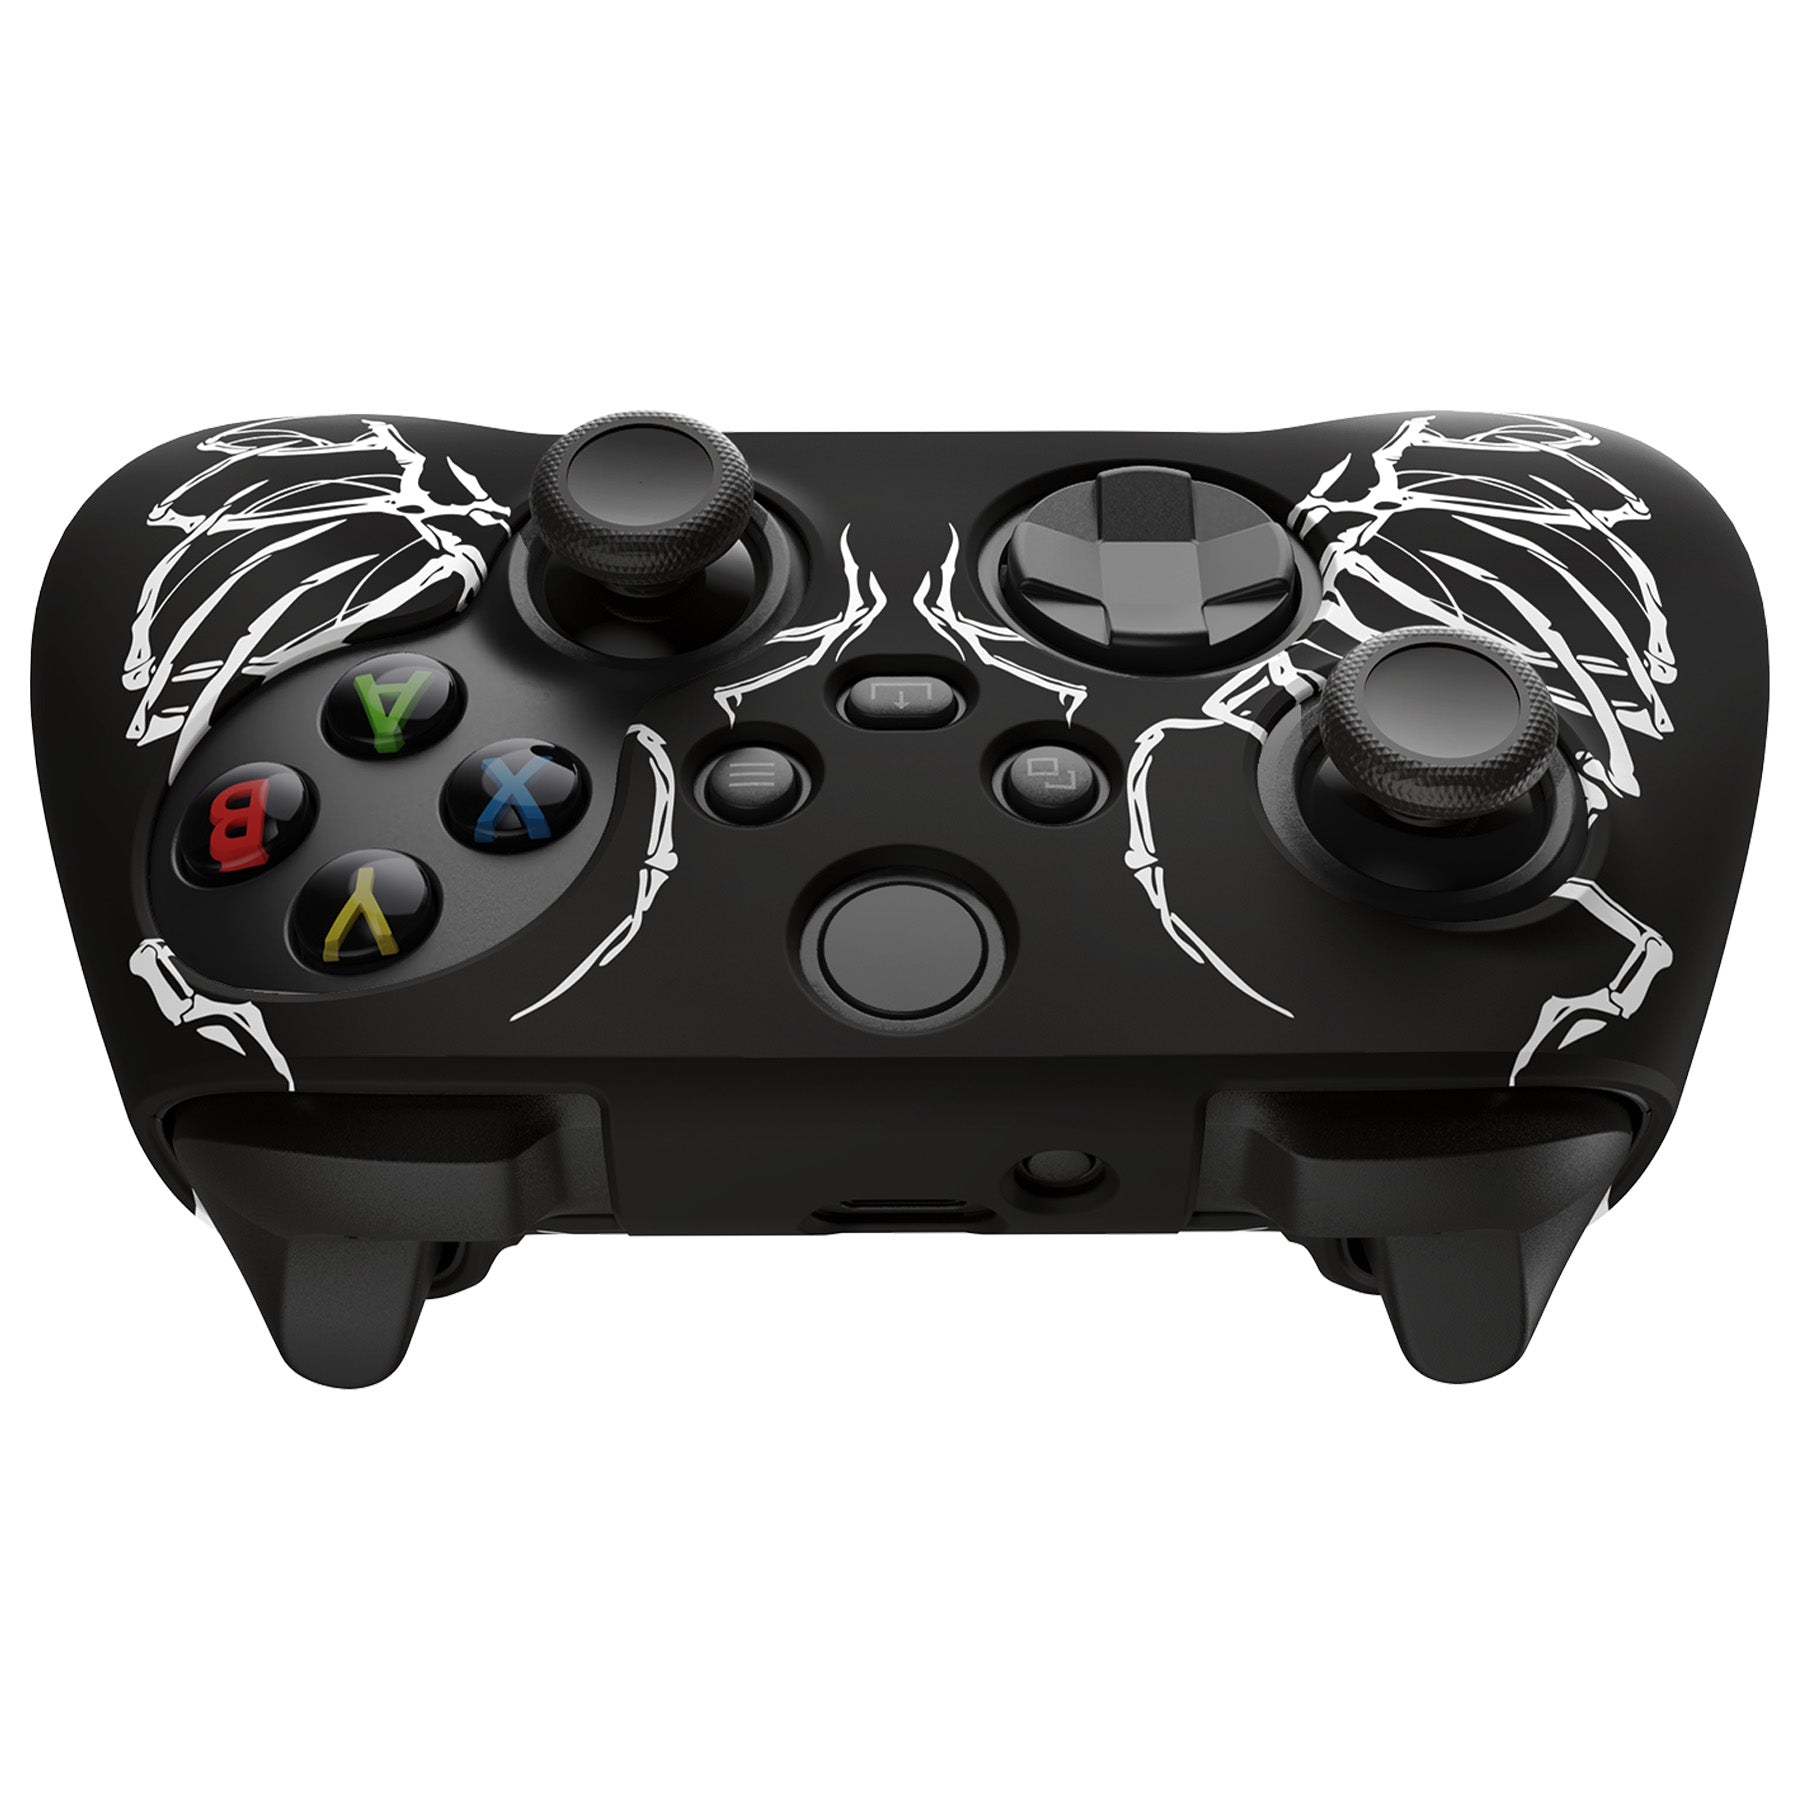 PlayVital Carving Skull Silicone Cover Skin wtih Thumb Grip Caps for Xbox Series X/S Controller - BLX3027 PlayVital